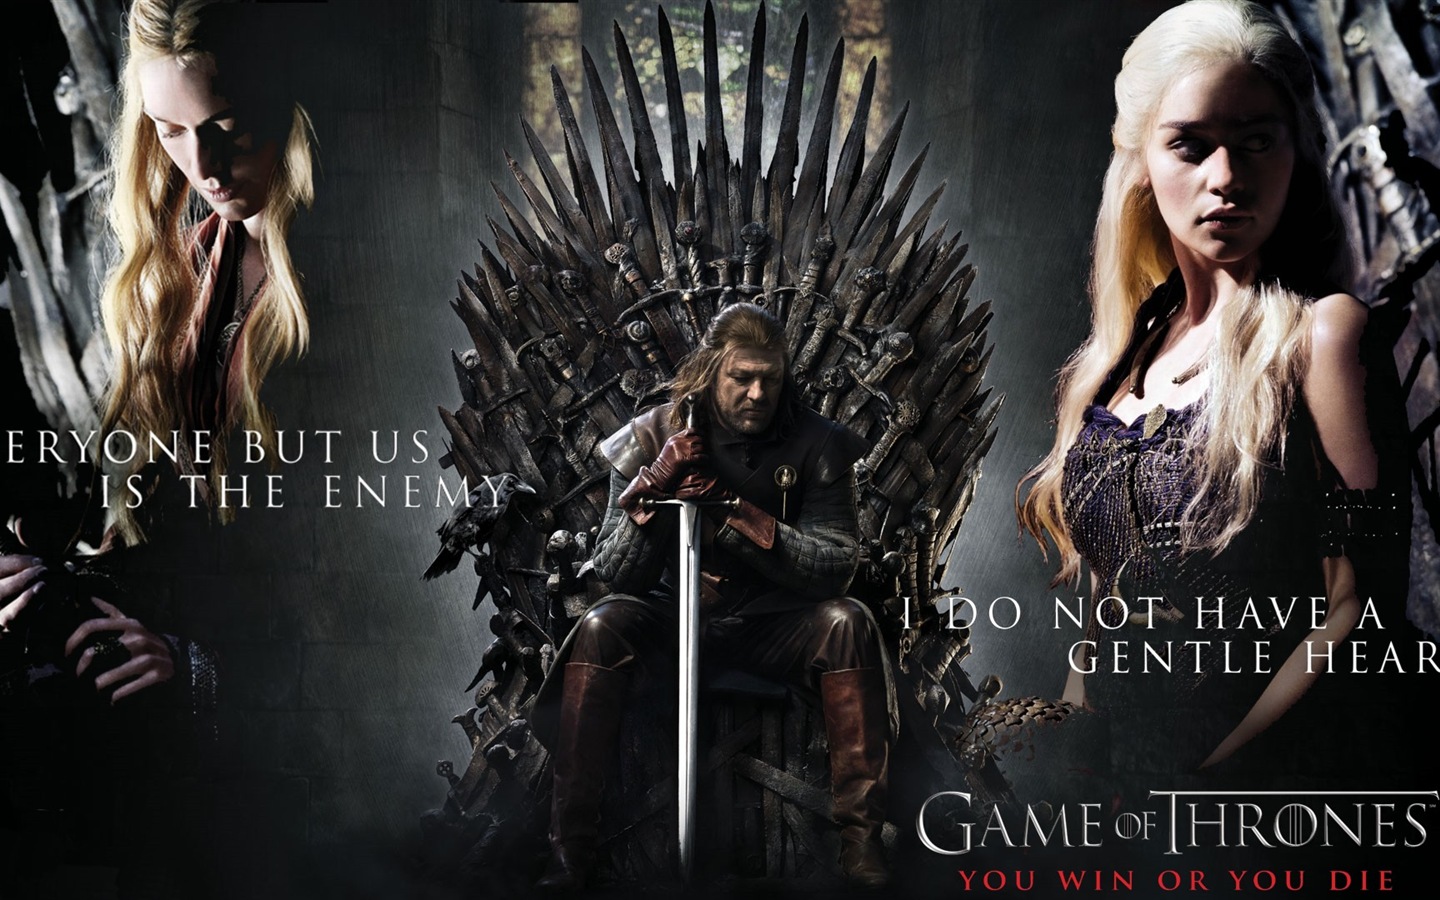 A Song of Ice and Fire: Game of Thrones fonds d'écran HD #9 - 1440x900